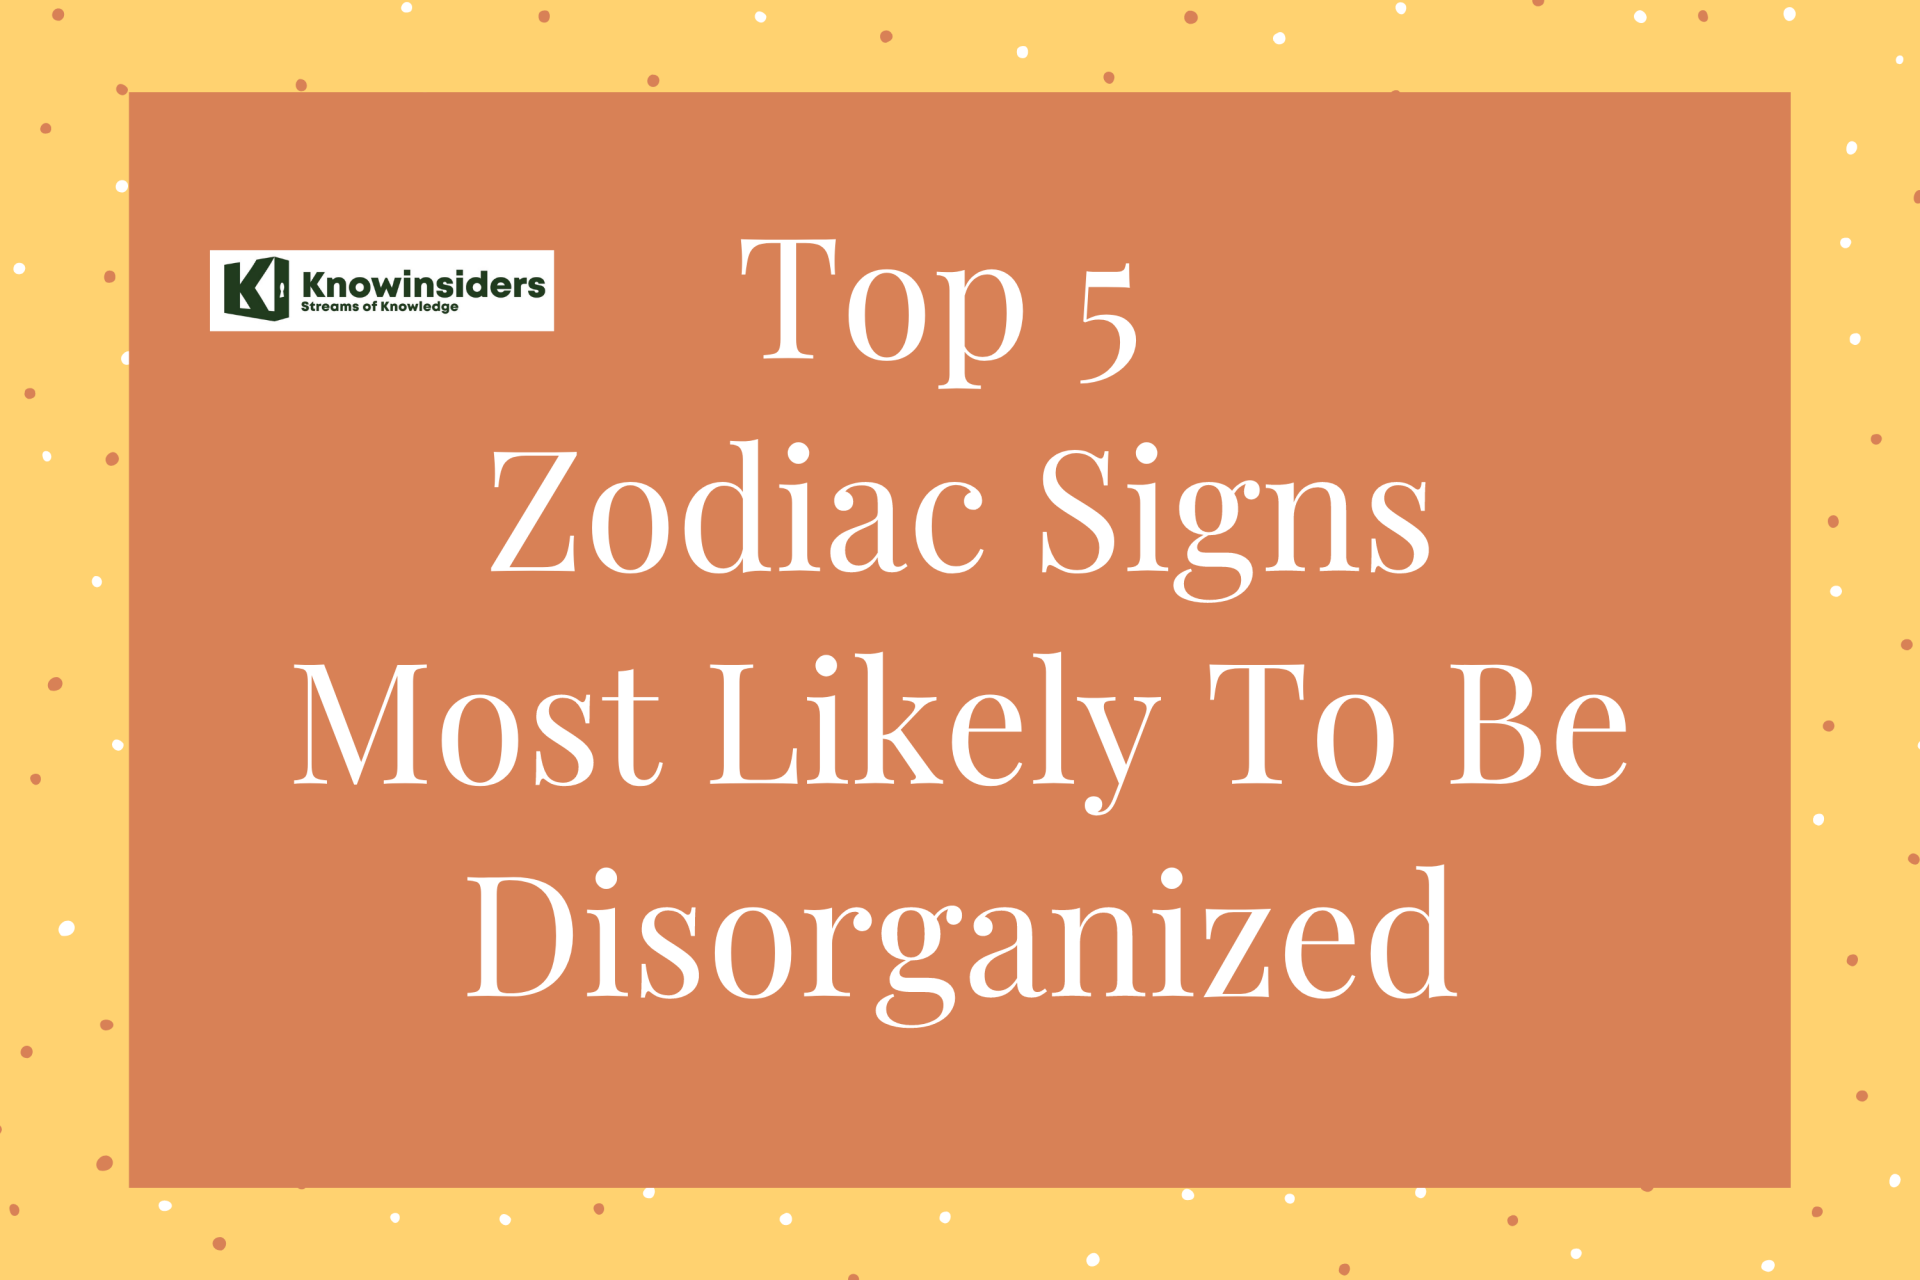 Top 5 Zodiac Signs Most Likely To Be Disorganized